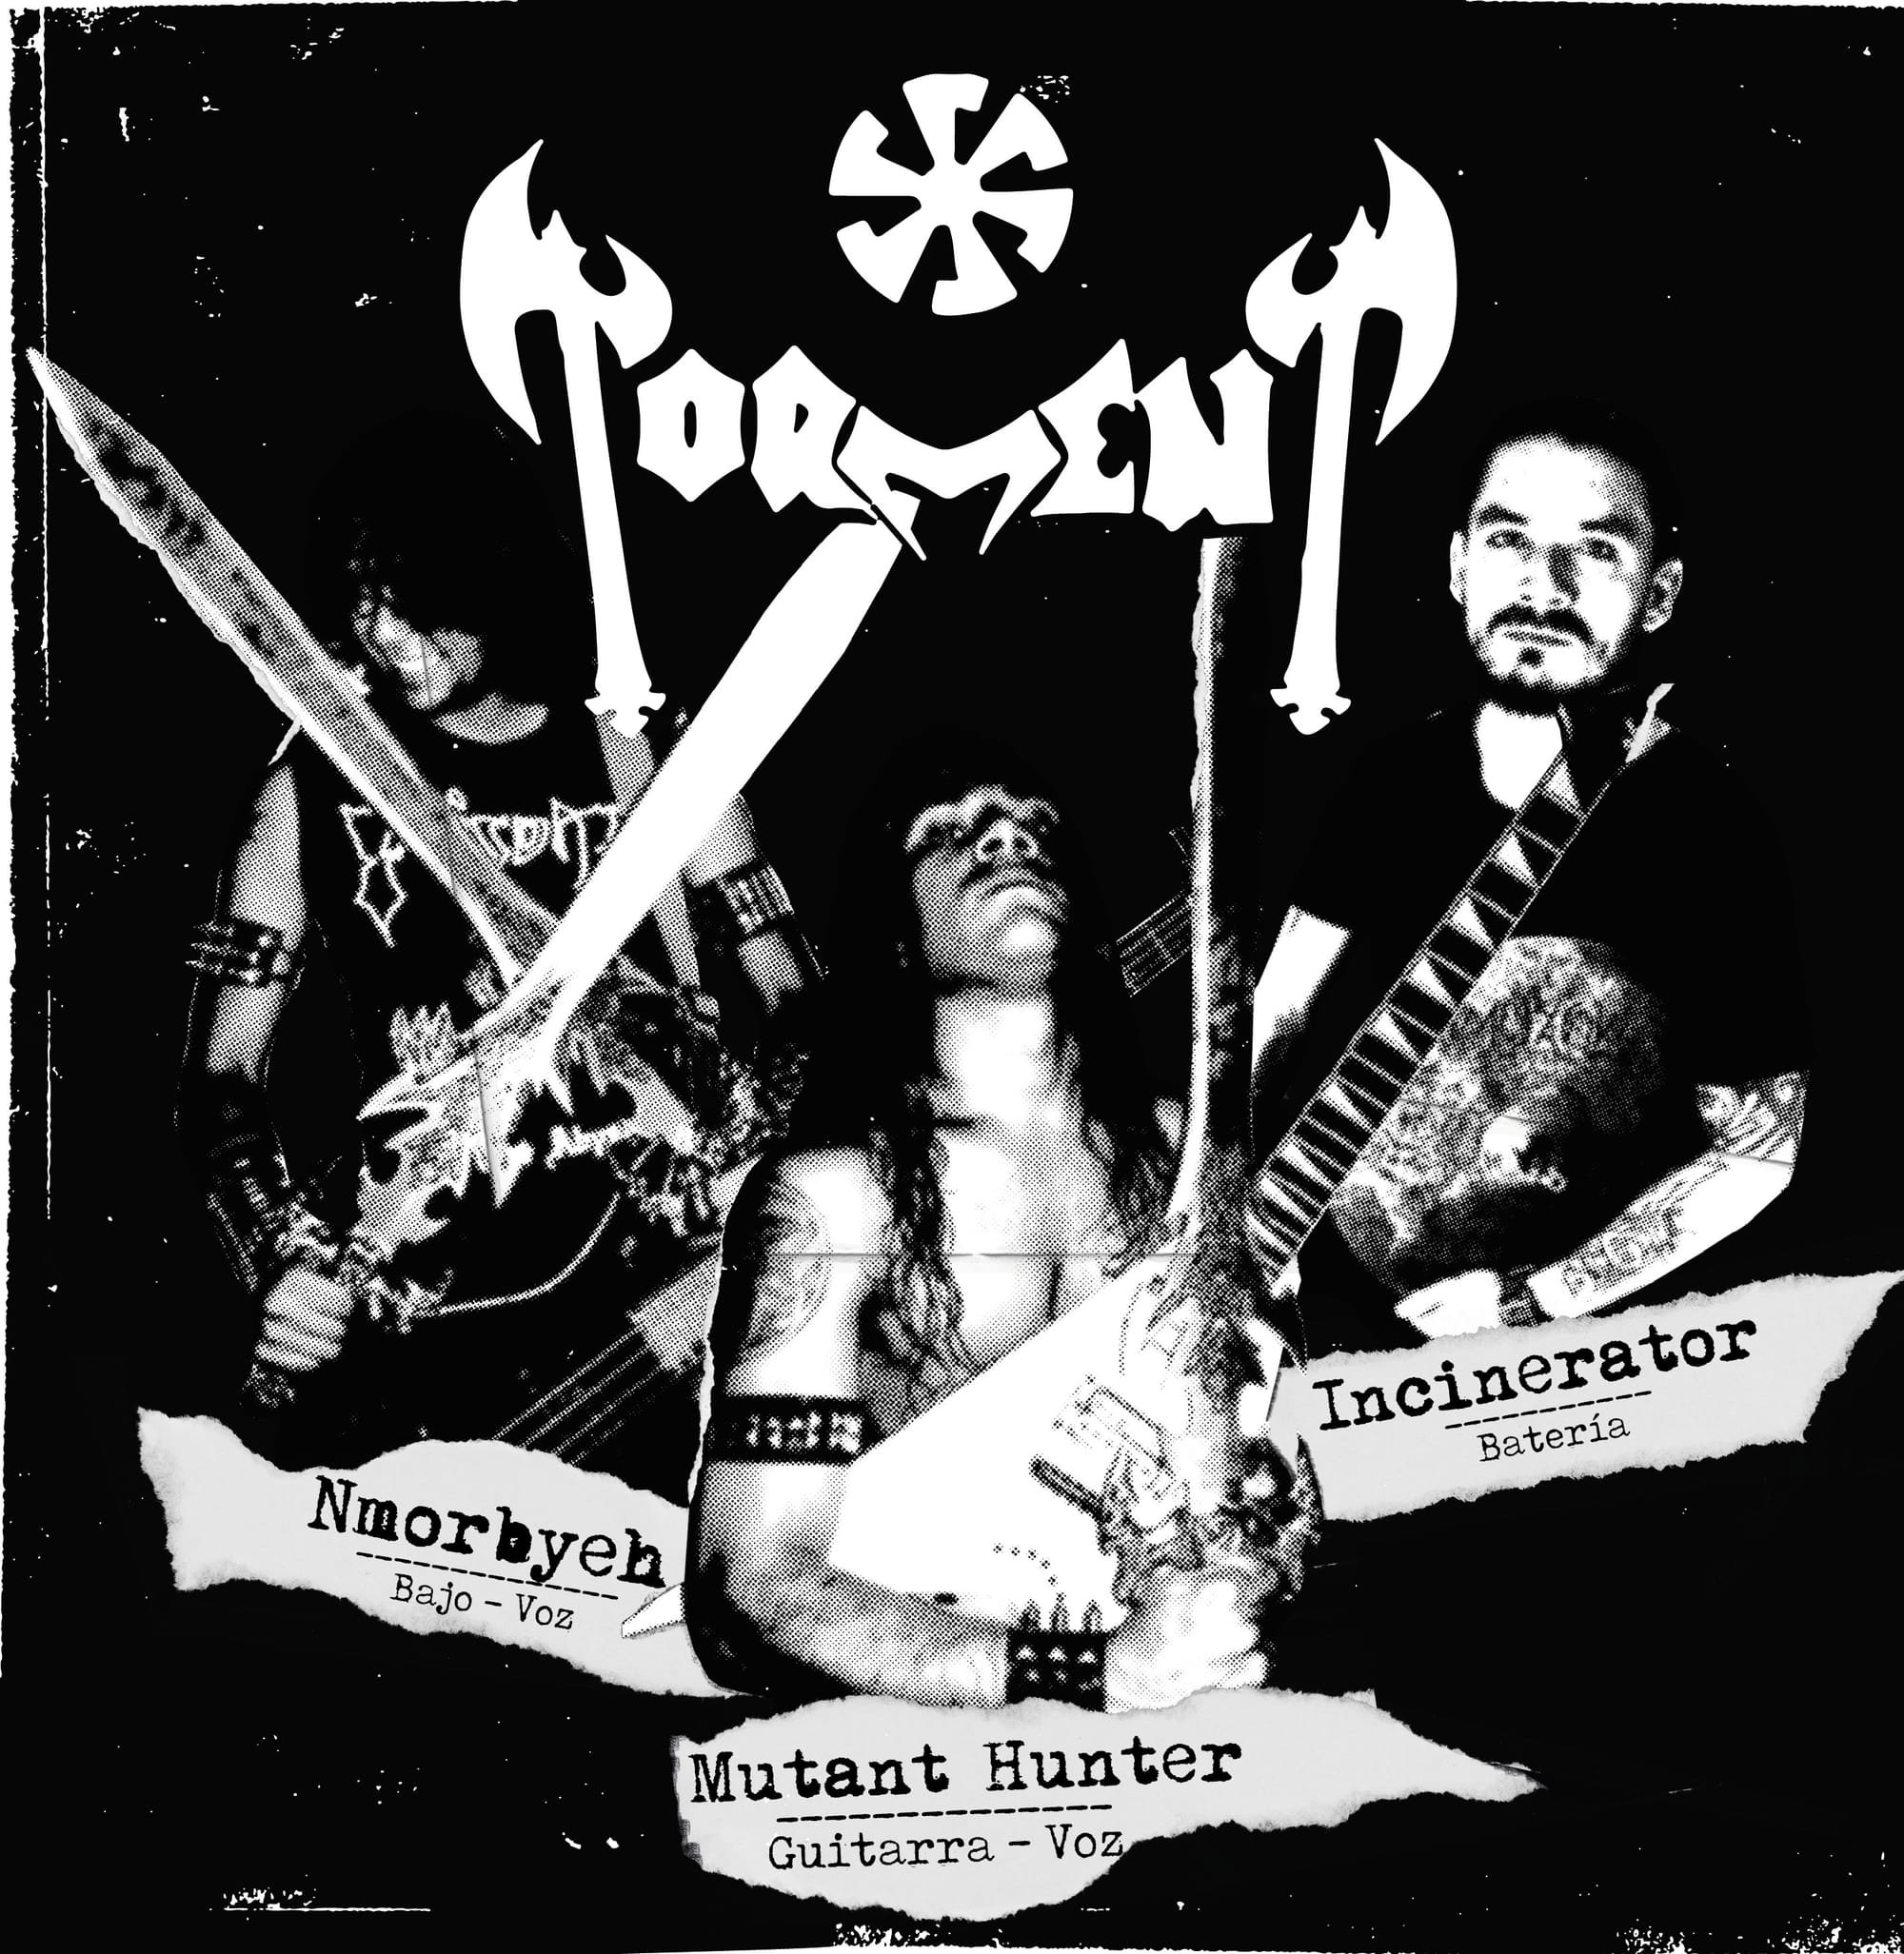 Interview with TORMENT